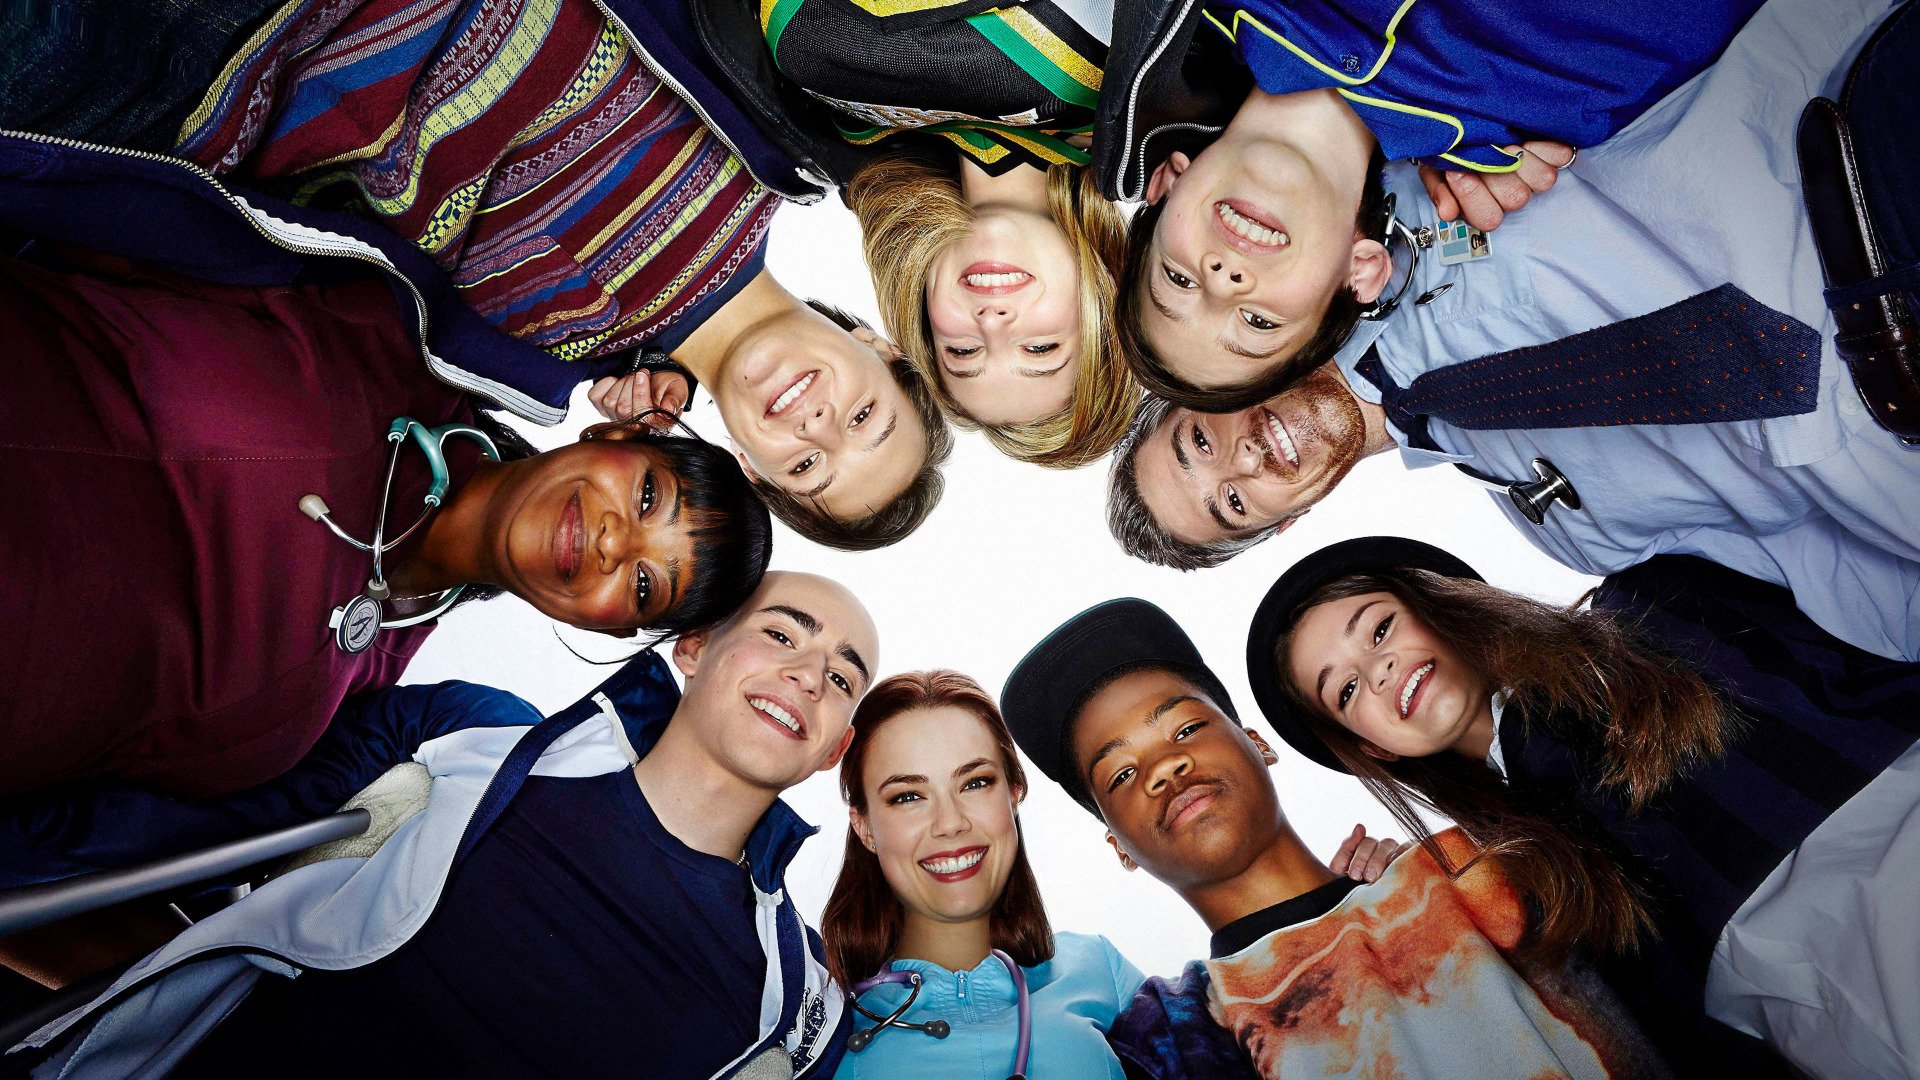 Show Red Band Society